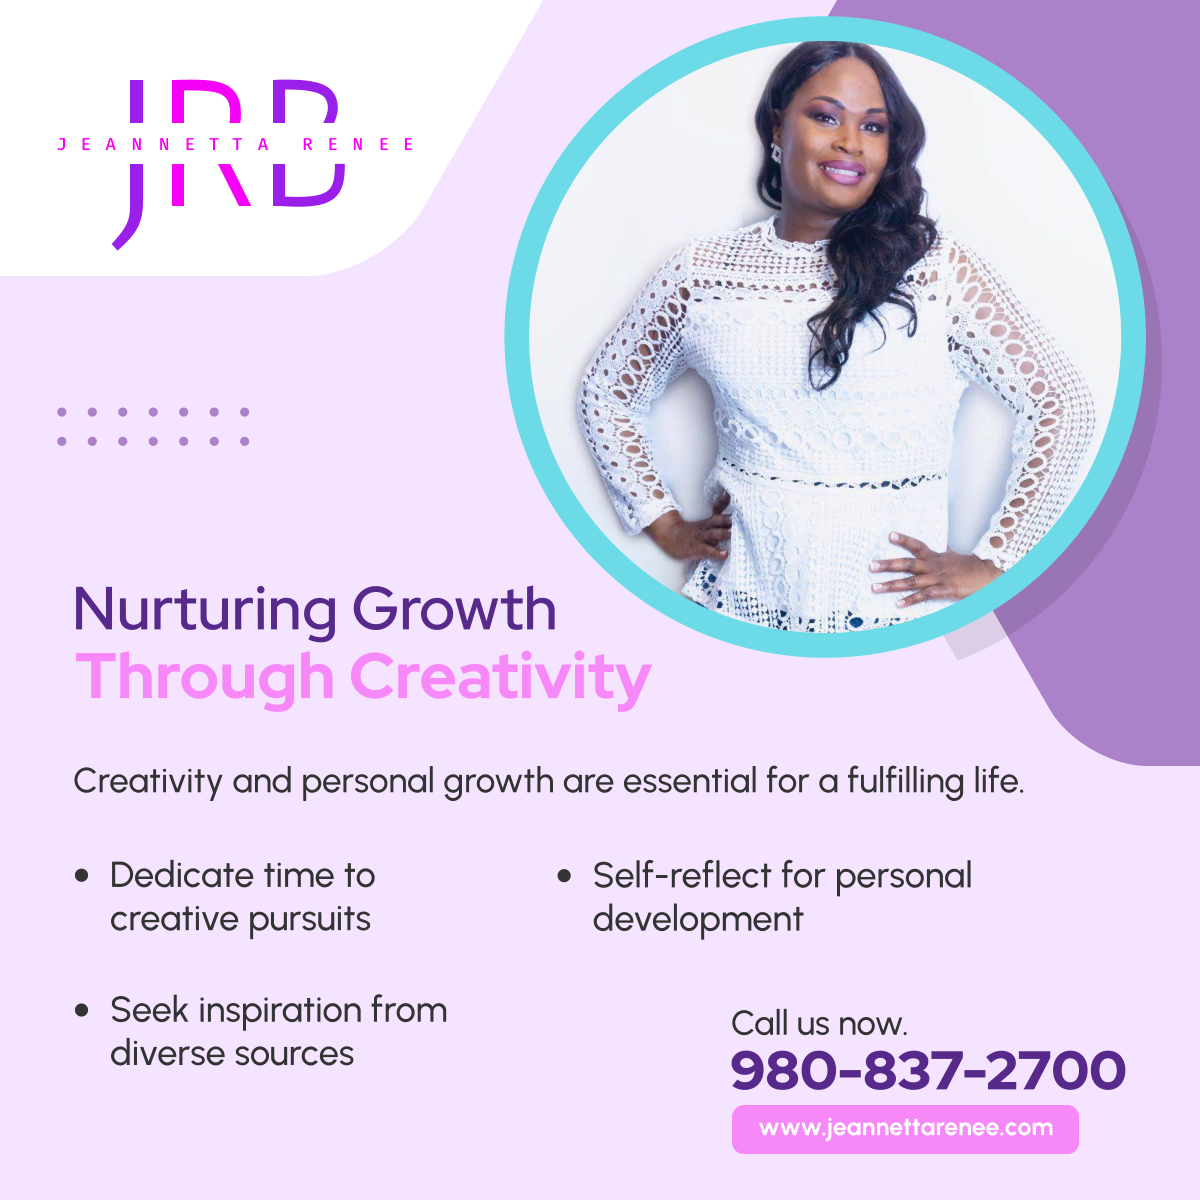 Cultivate personal growth through creativity through these tips. Follow for more inspiring posts and tips to balance your creative journey with personal development.

#PersonalGrowth #NurturingCreativity #MintHillNC #BusinessCoachingServices #DevelopmentStrategist